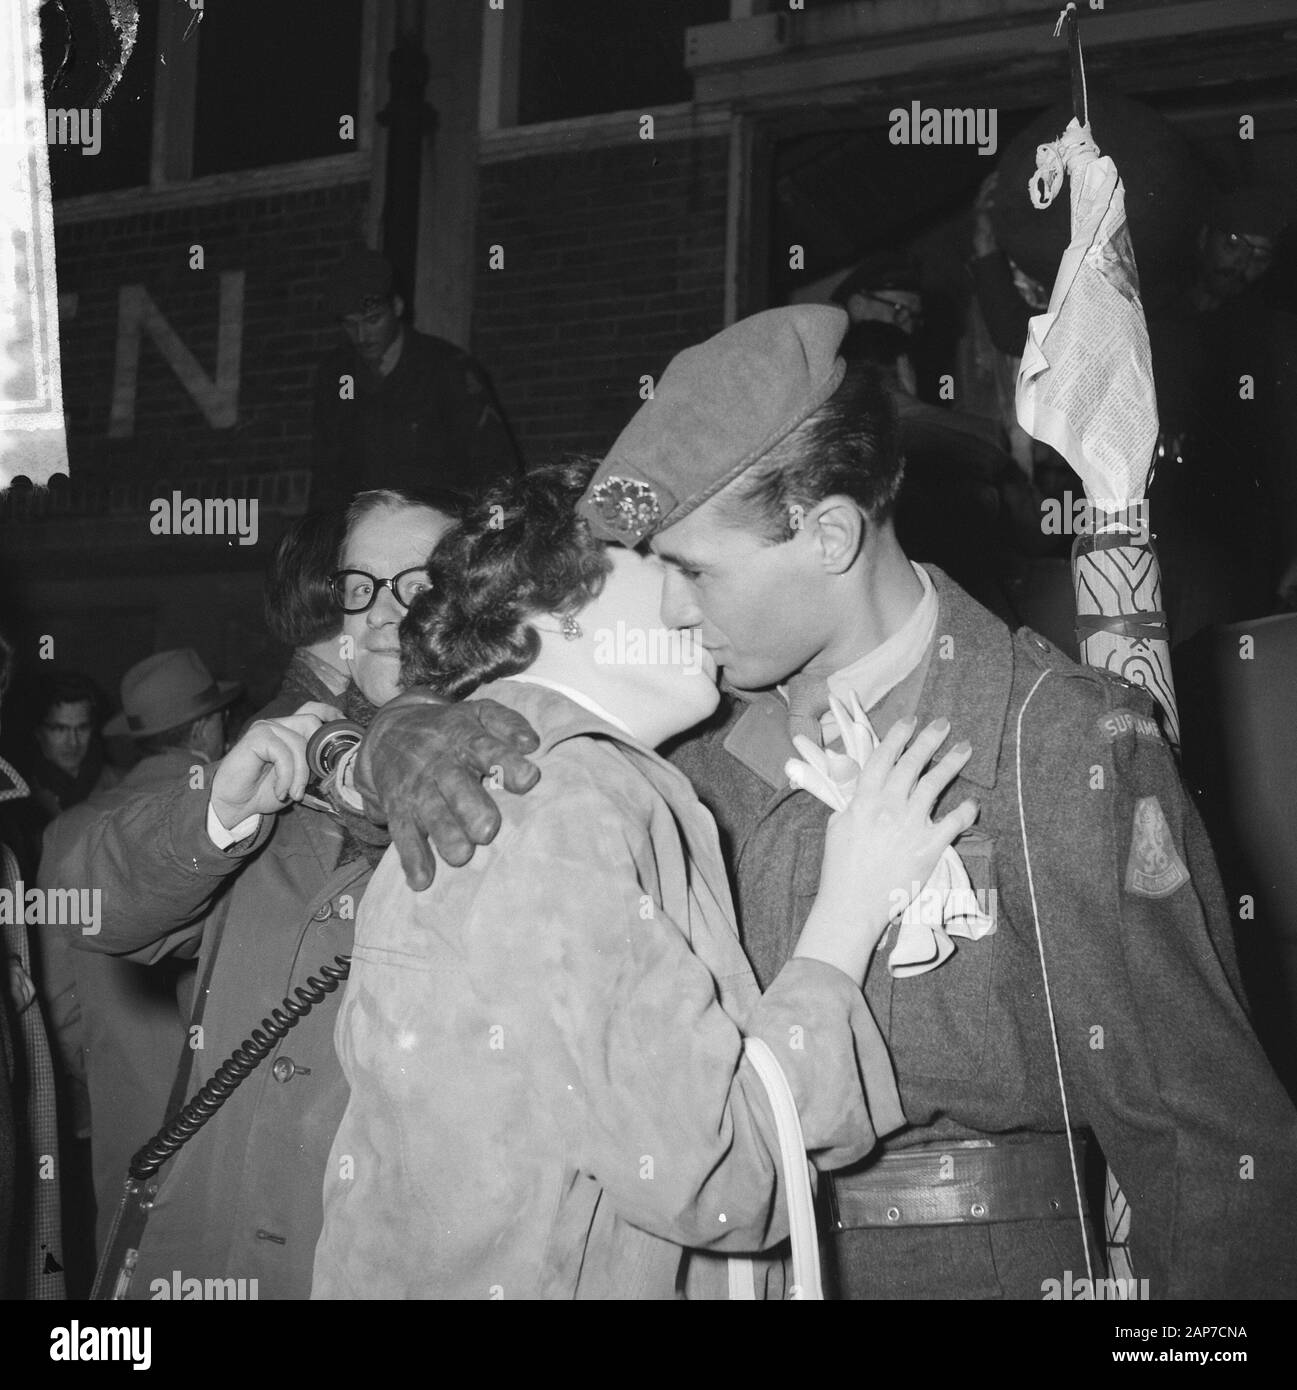 Arrival first detachment of the first Suriname Compag in Amsterdam, soldier greeted his fiancée Date: 23 February 1961 Location: Amsterdam, Noord-Holland Keywords: COMPAGNIES, DETACHEMENTS, arrivals, soldiers Stock Photo